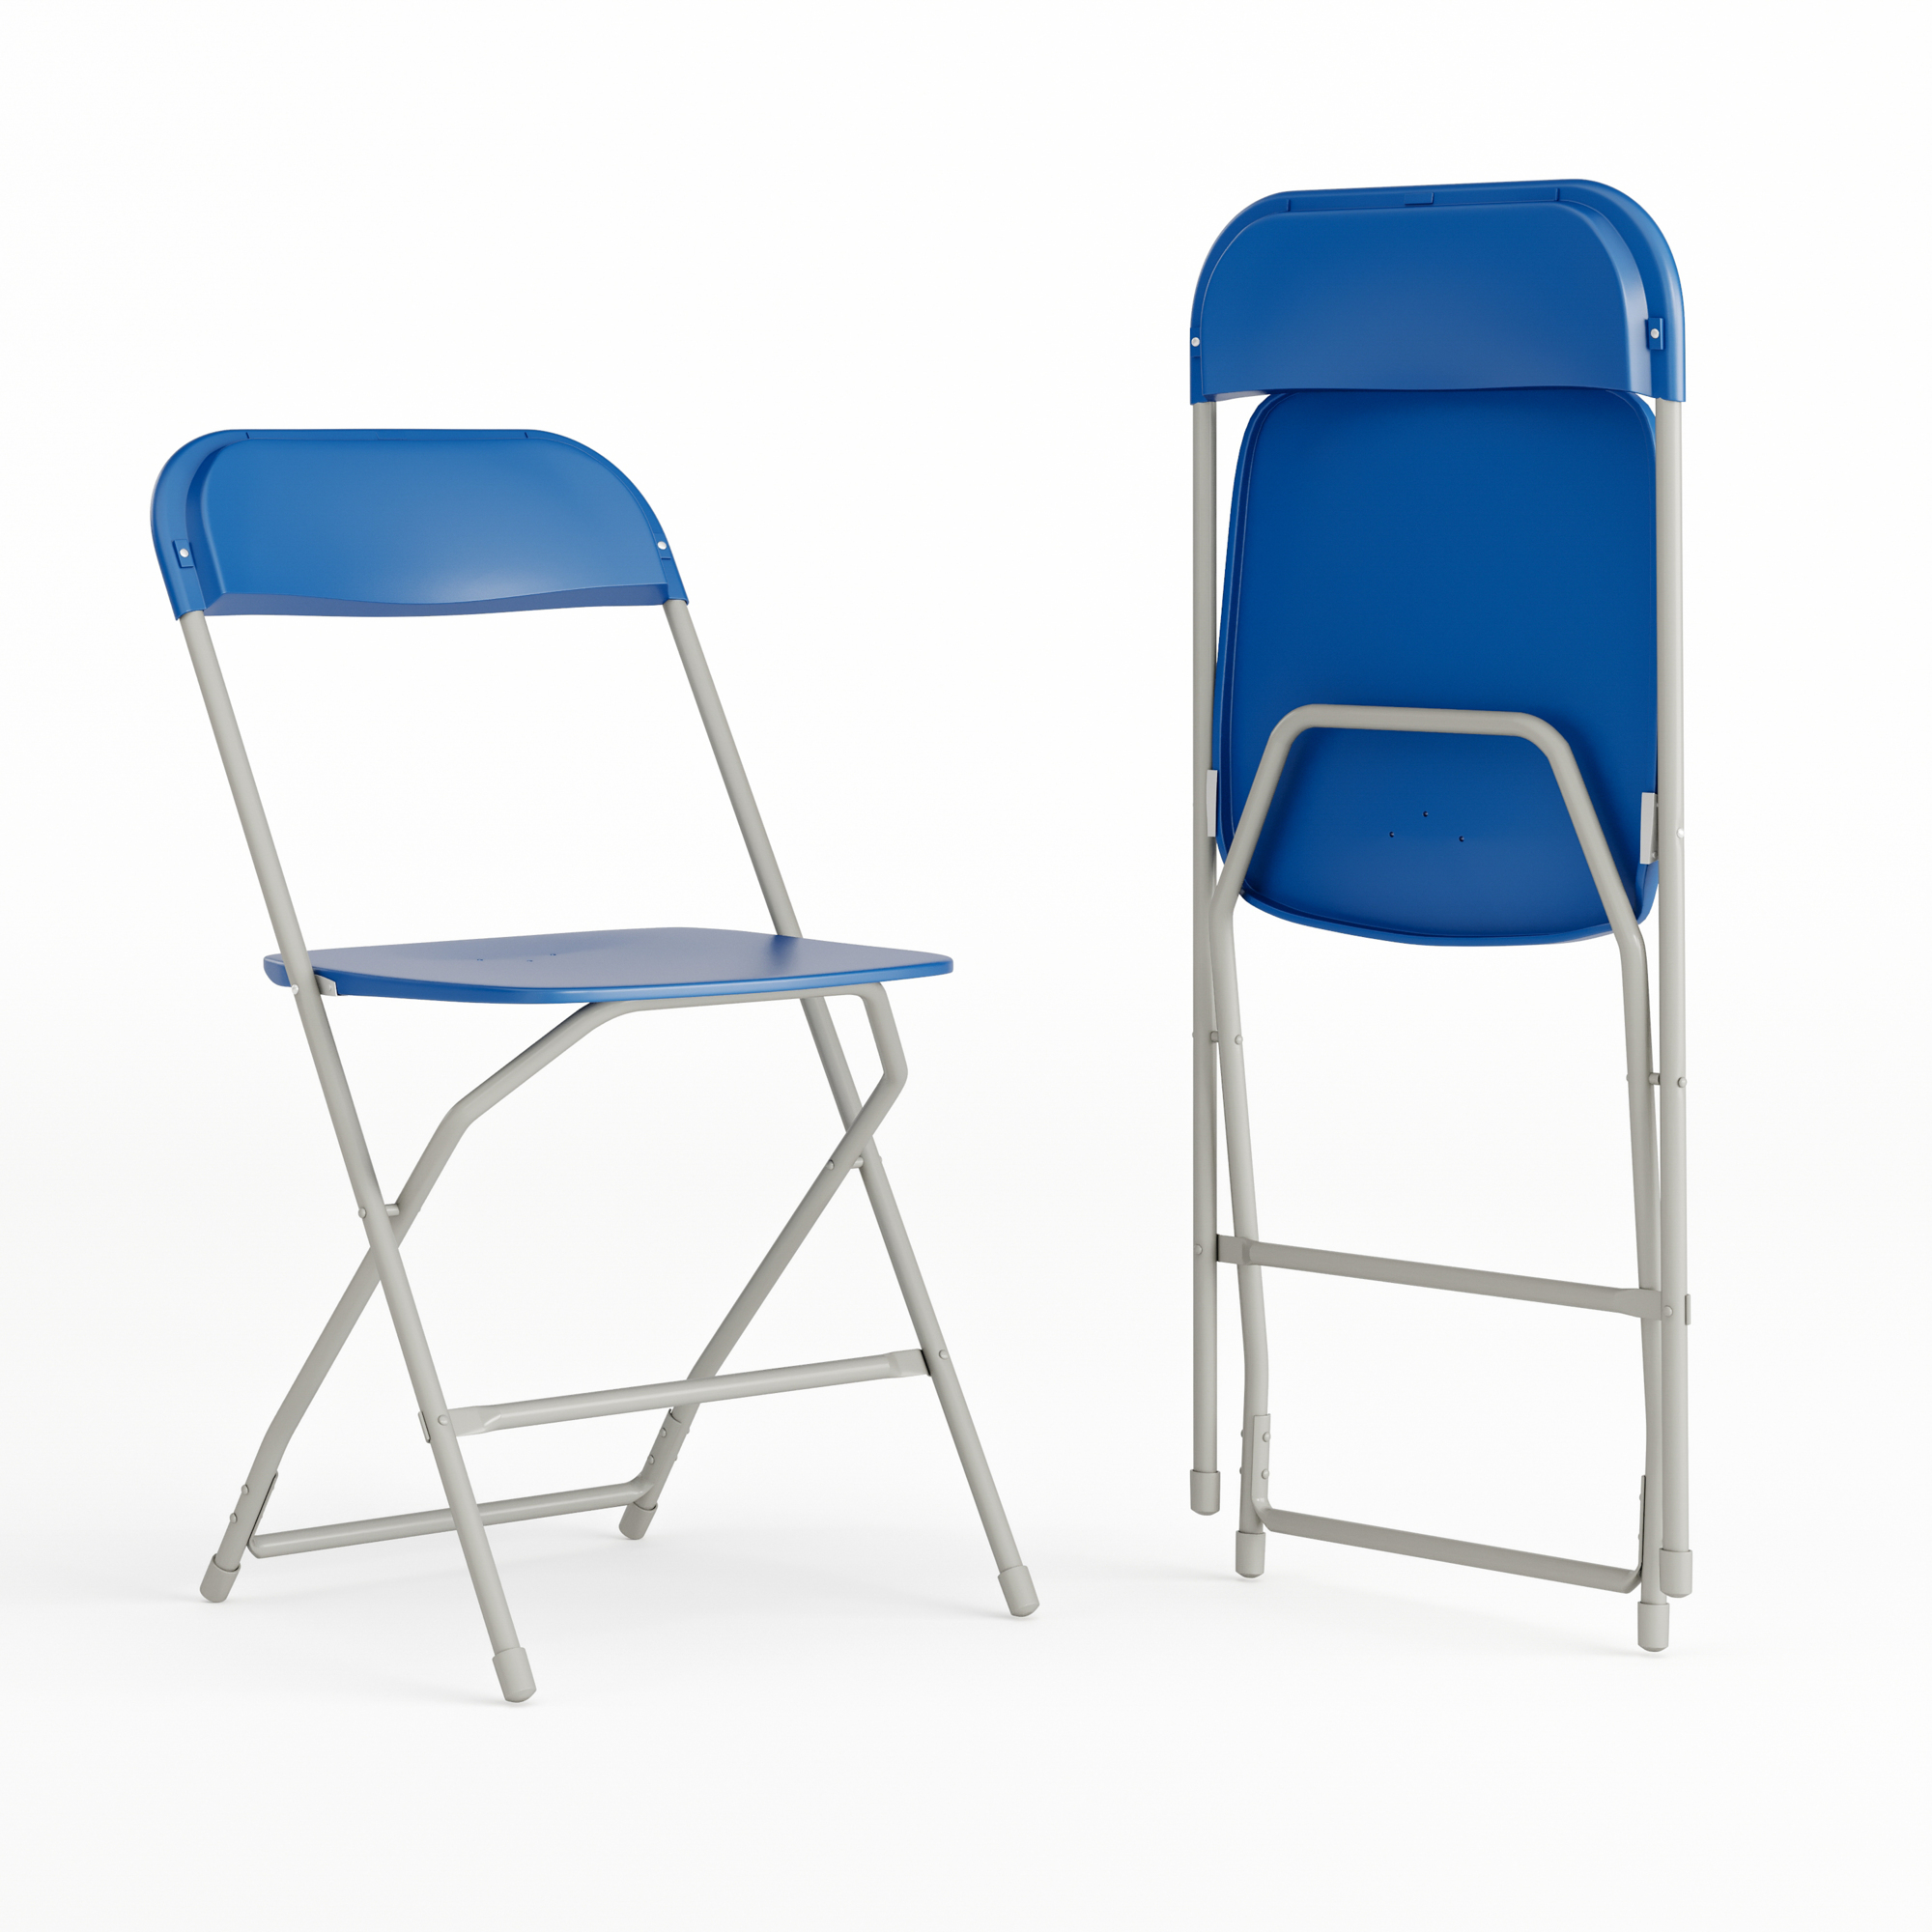 Flash Furniture, Folding Chair - Blue Plastic - 2 Pack, Primary Color Blue, Included (qty.) 2, Model 2LEL3BLUE